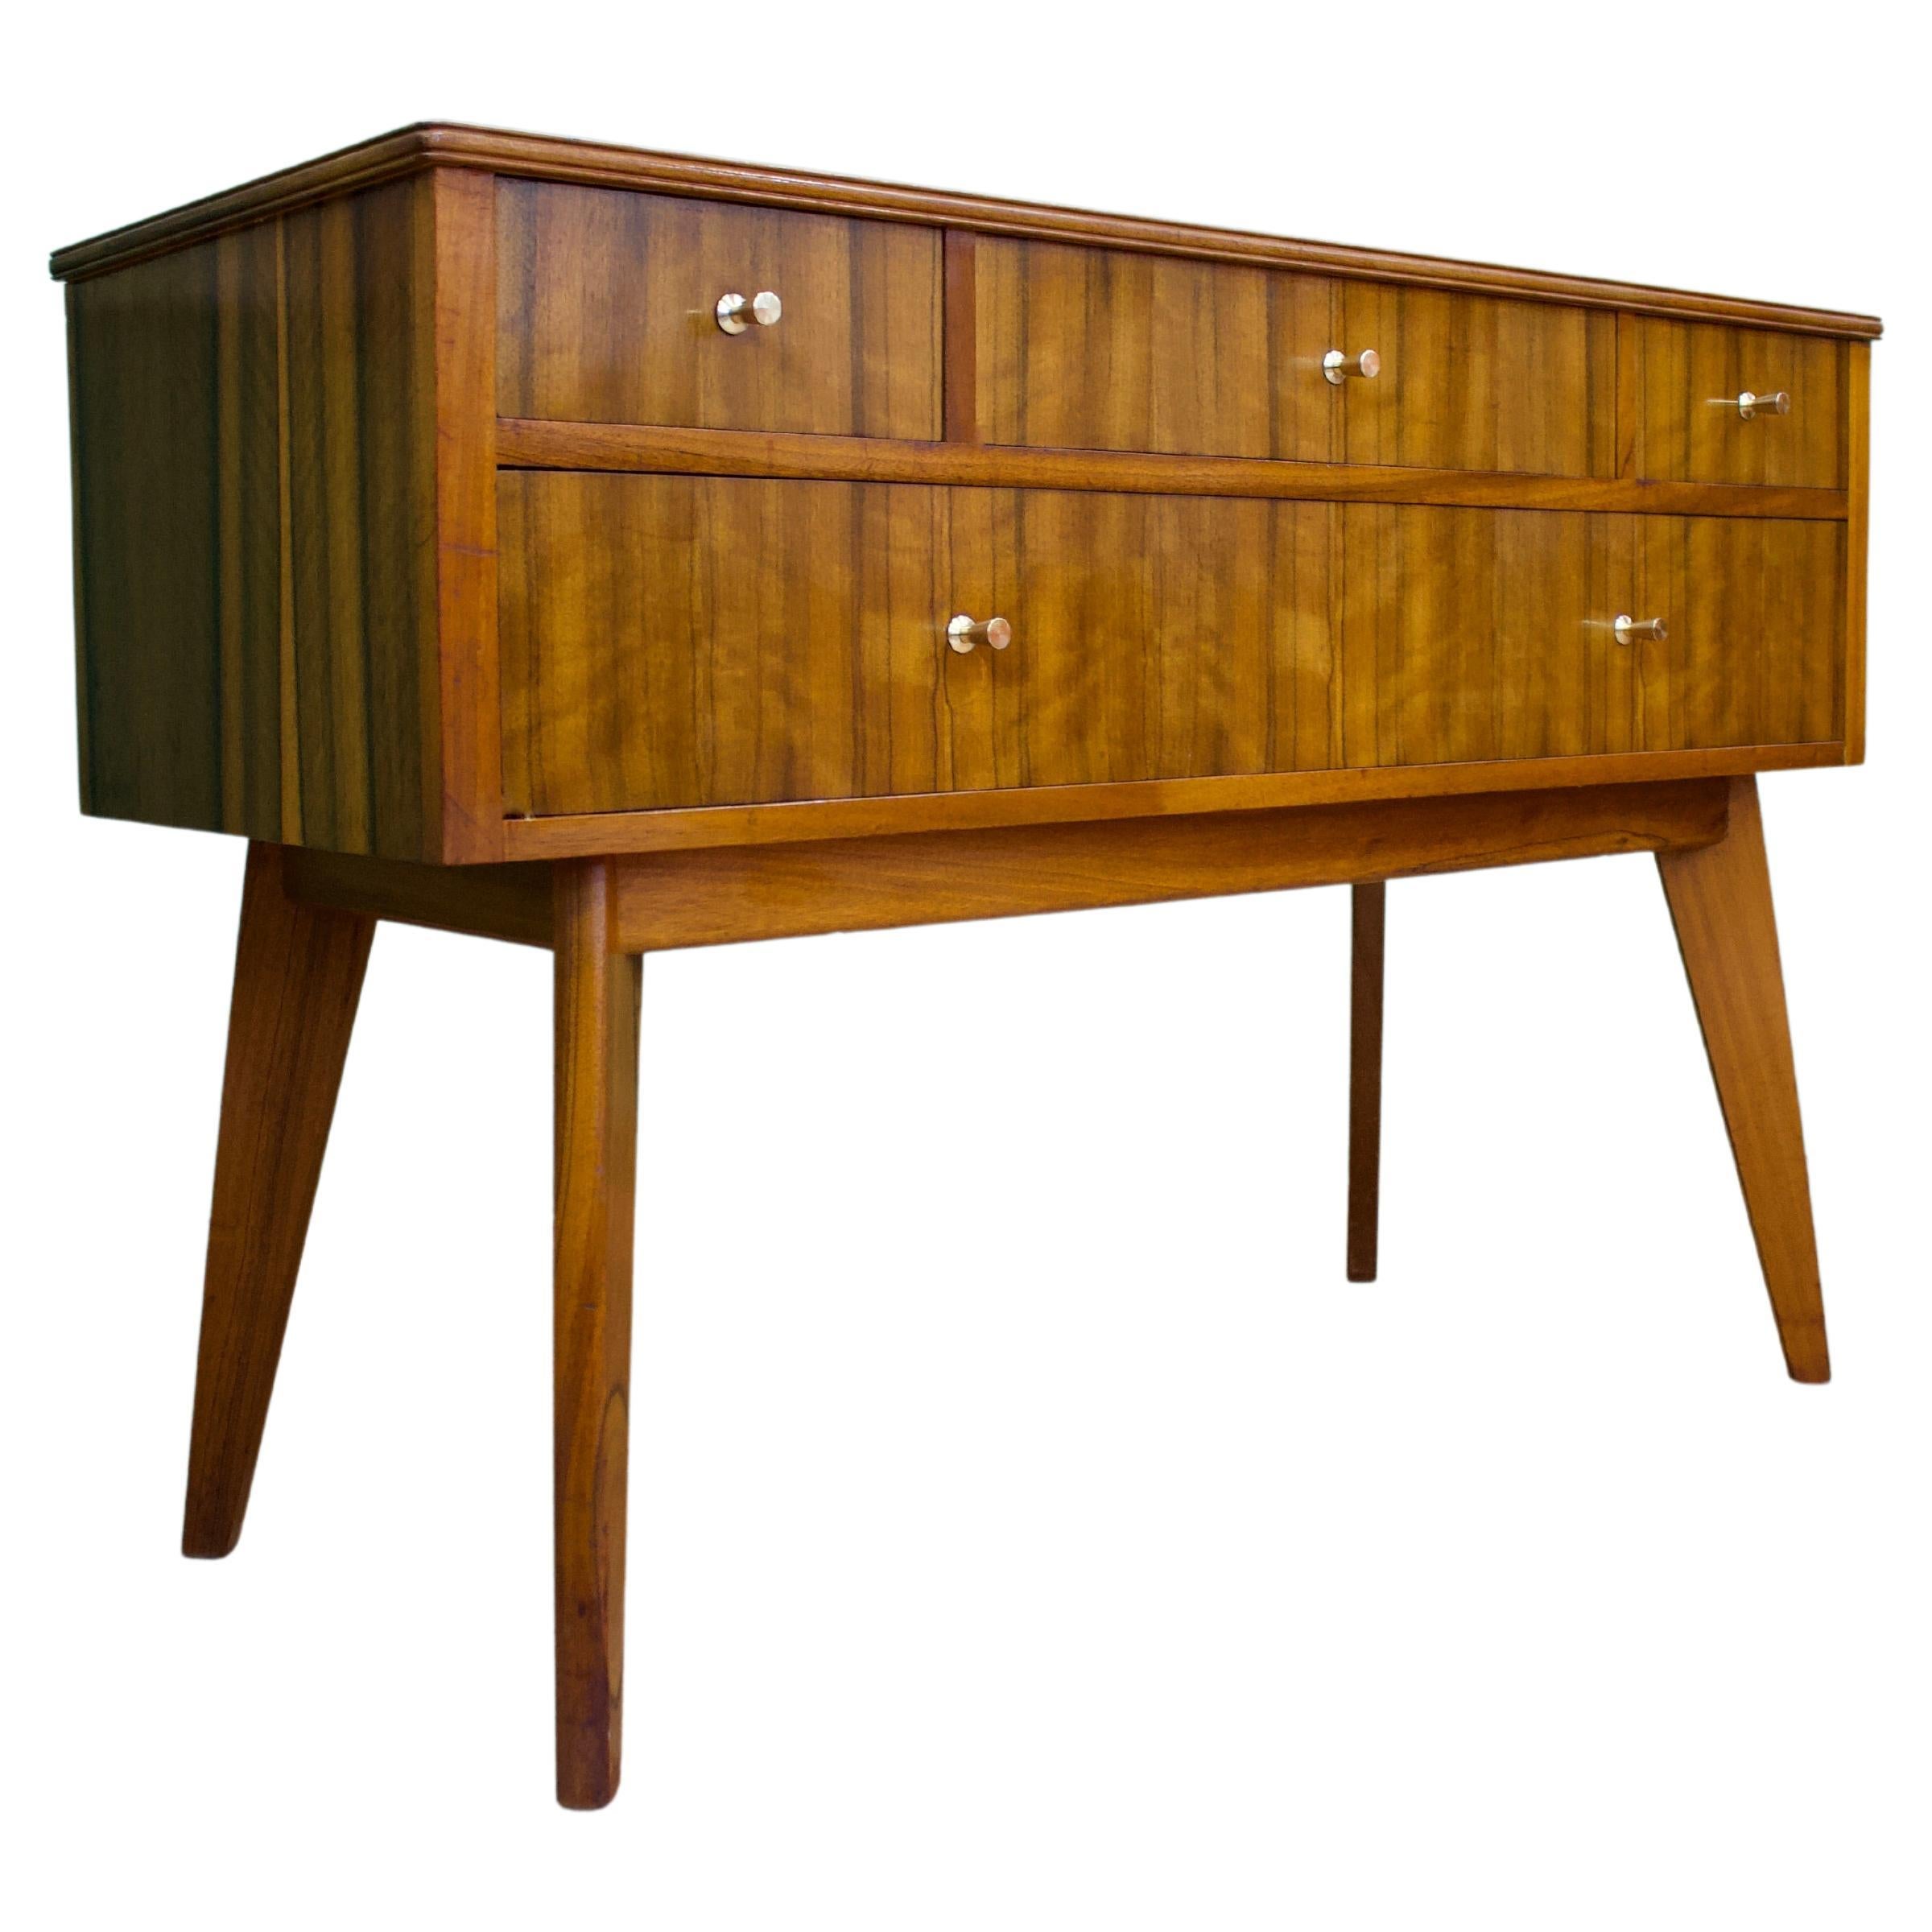 Midcentury Walnut Compact Sideboard from Morris of Glasgow, 1950s For Sale